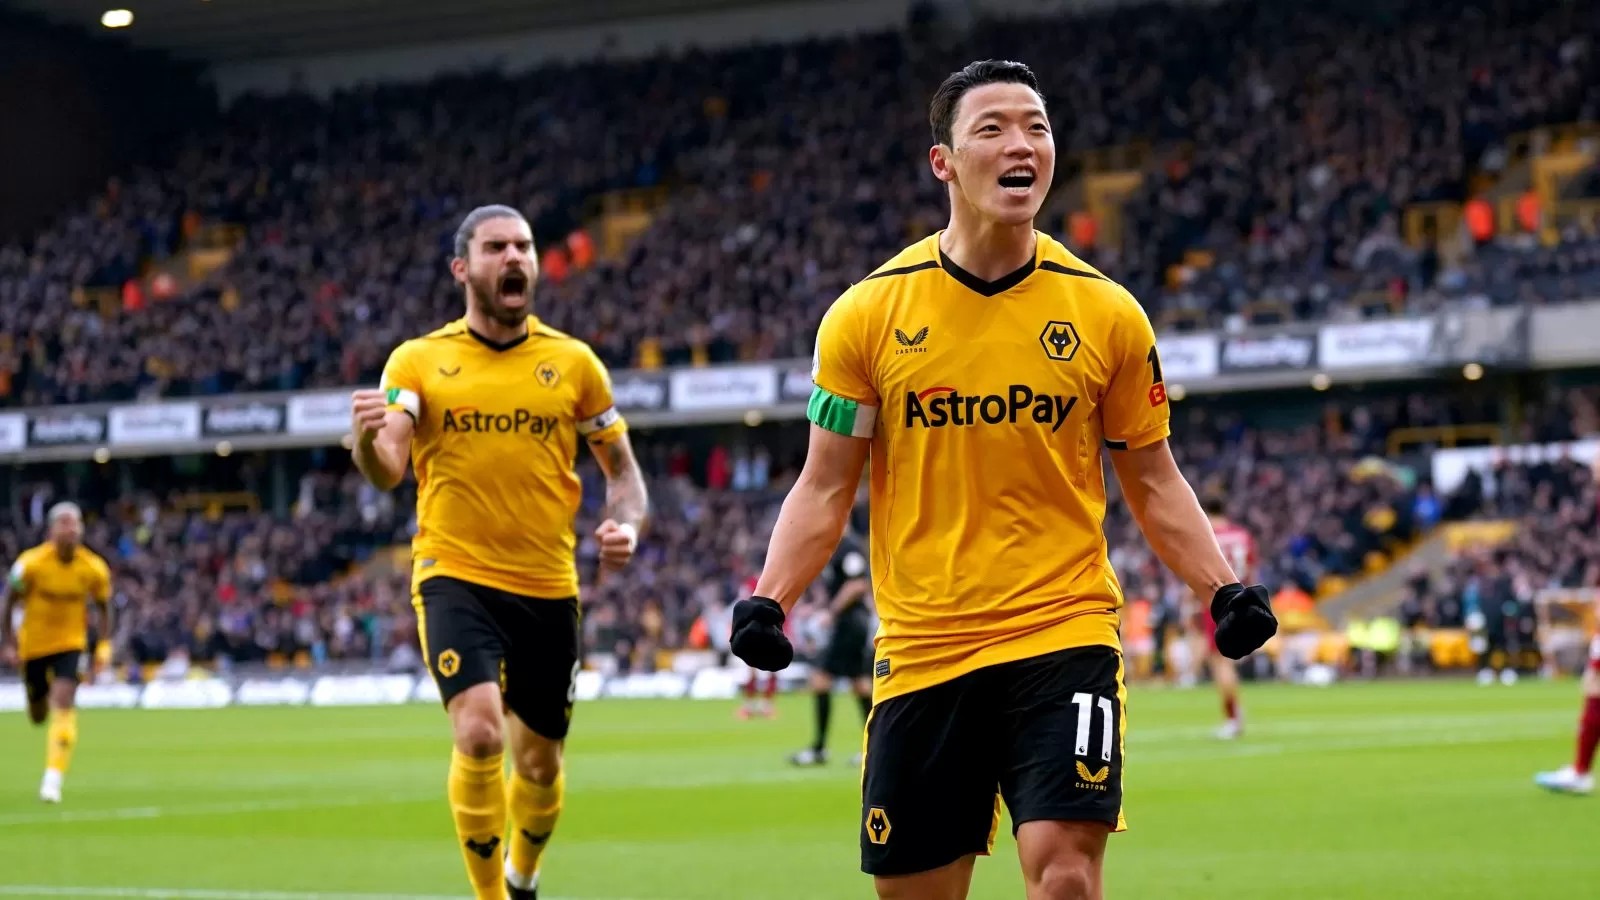 Wolves 3-0 Liverpool: Another poor day for the Reds as Lopetegui’s men win easily at Molineux